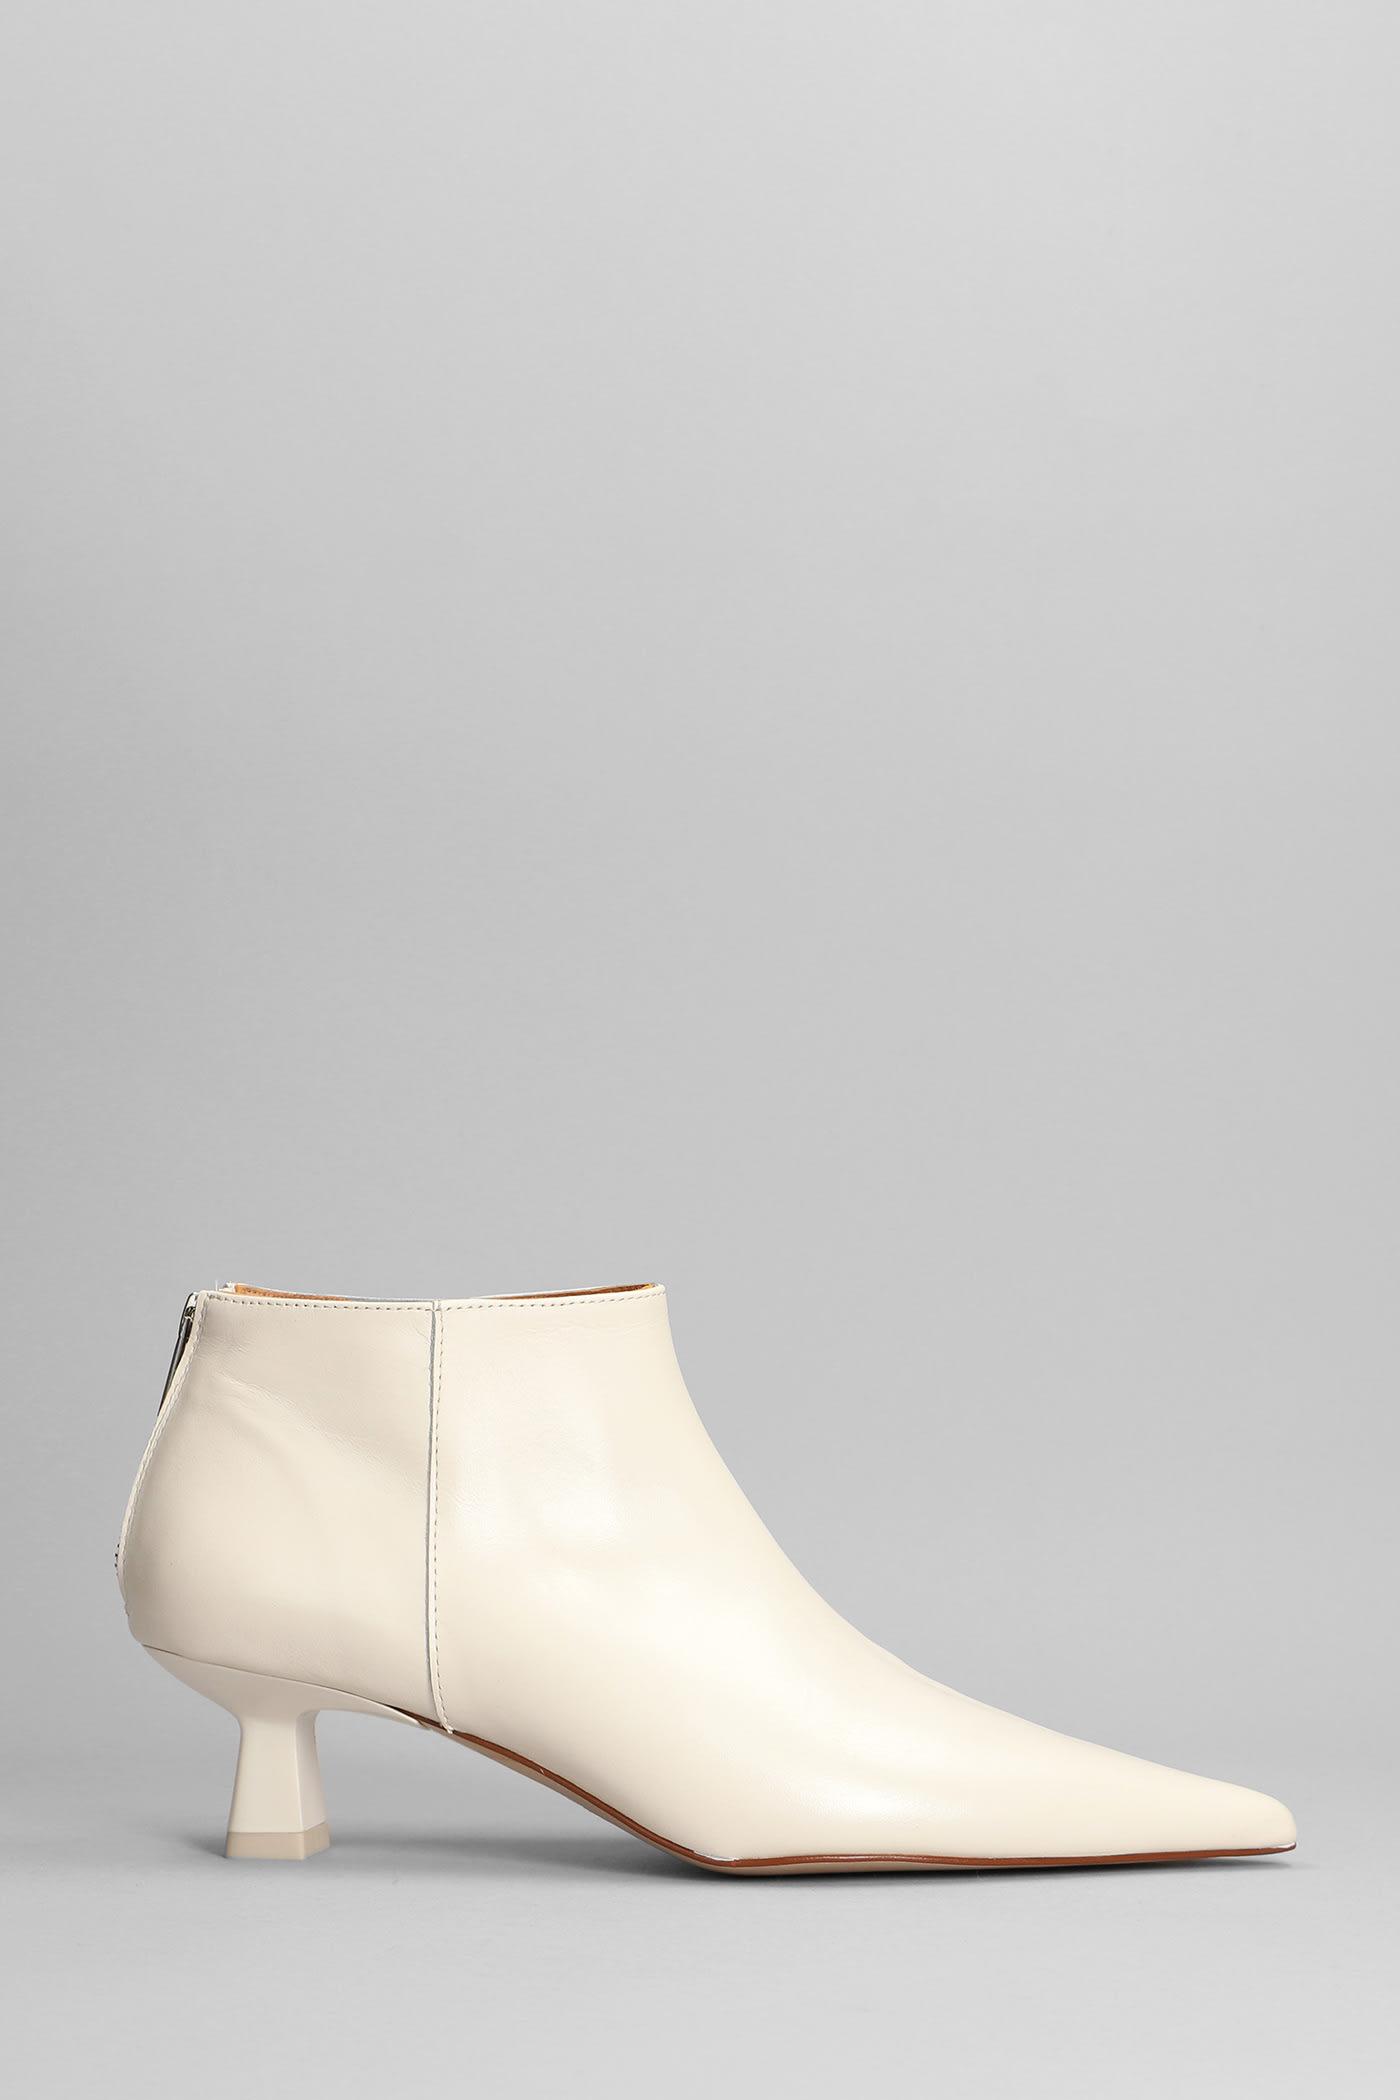 Ganni Low Heels Ankle Boots In Beige Leather in White | Lyst